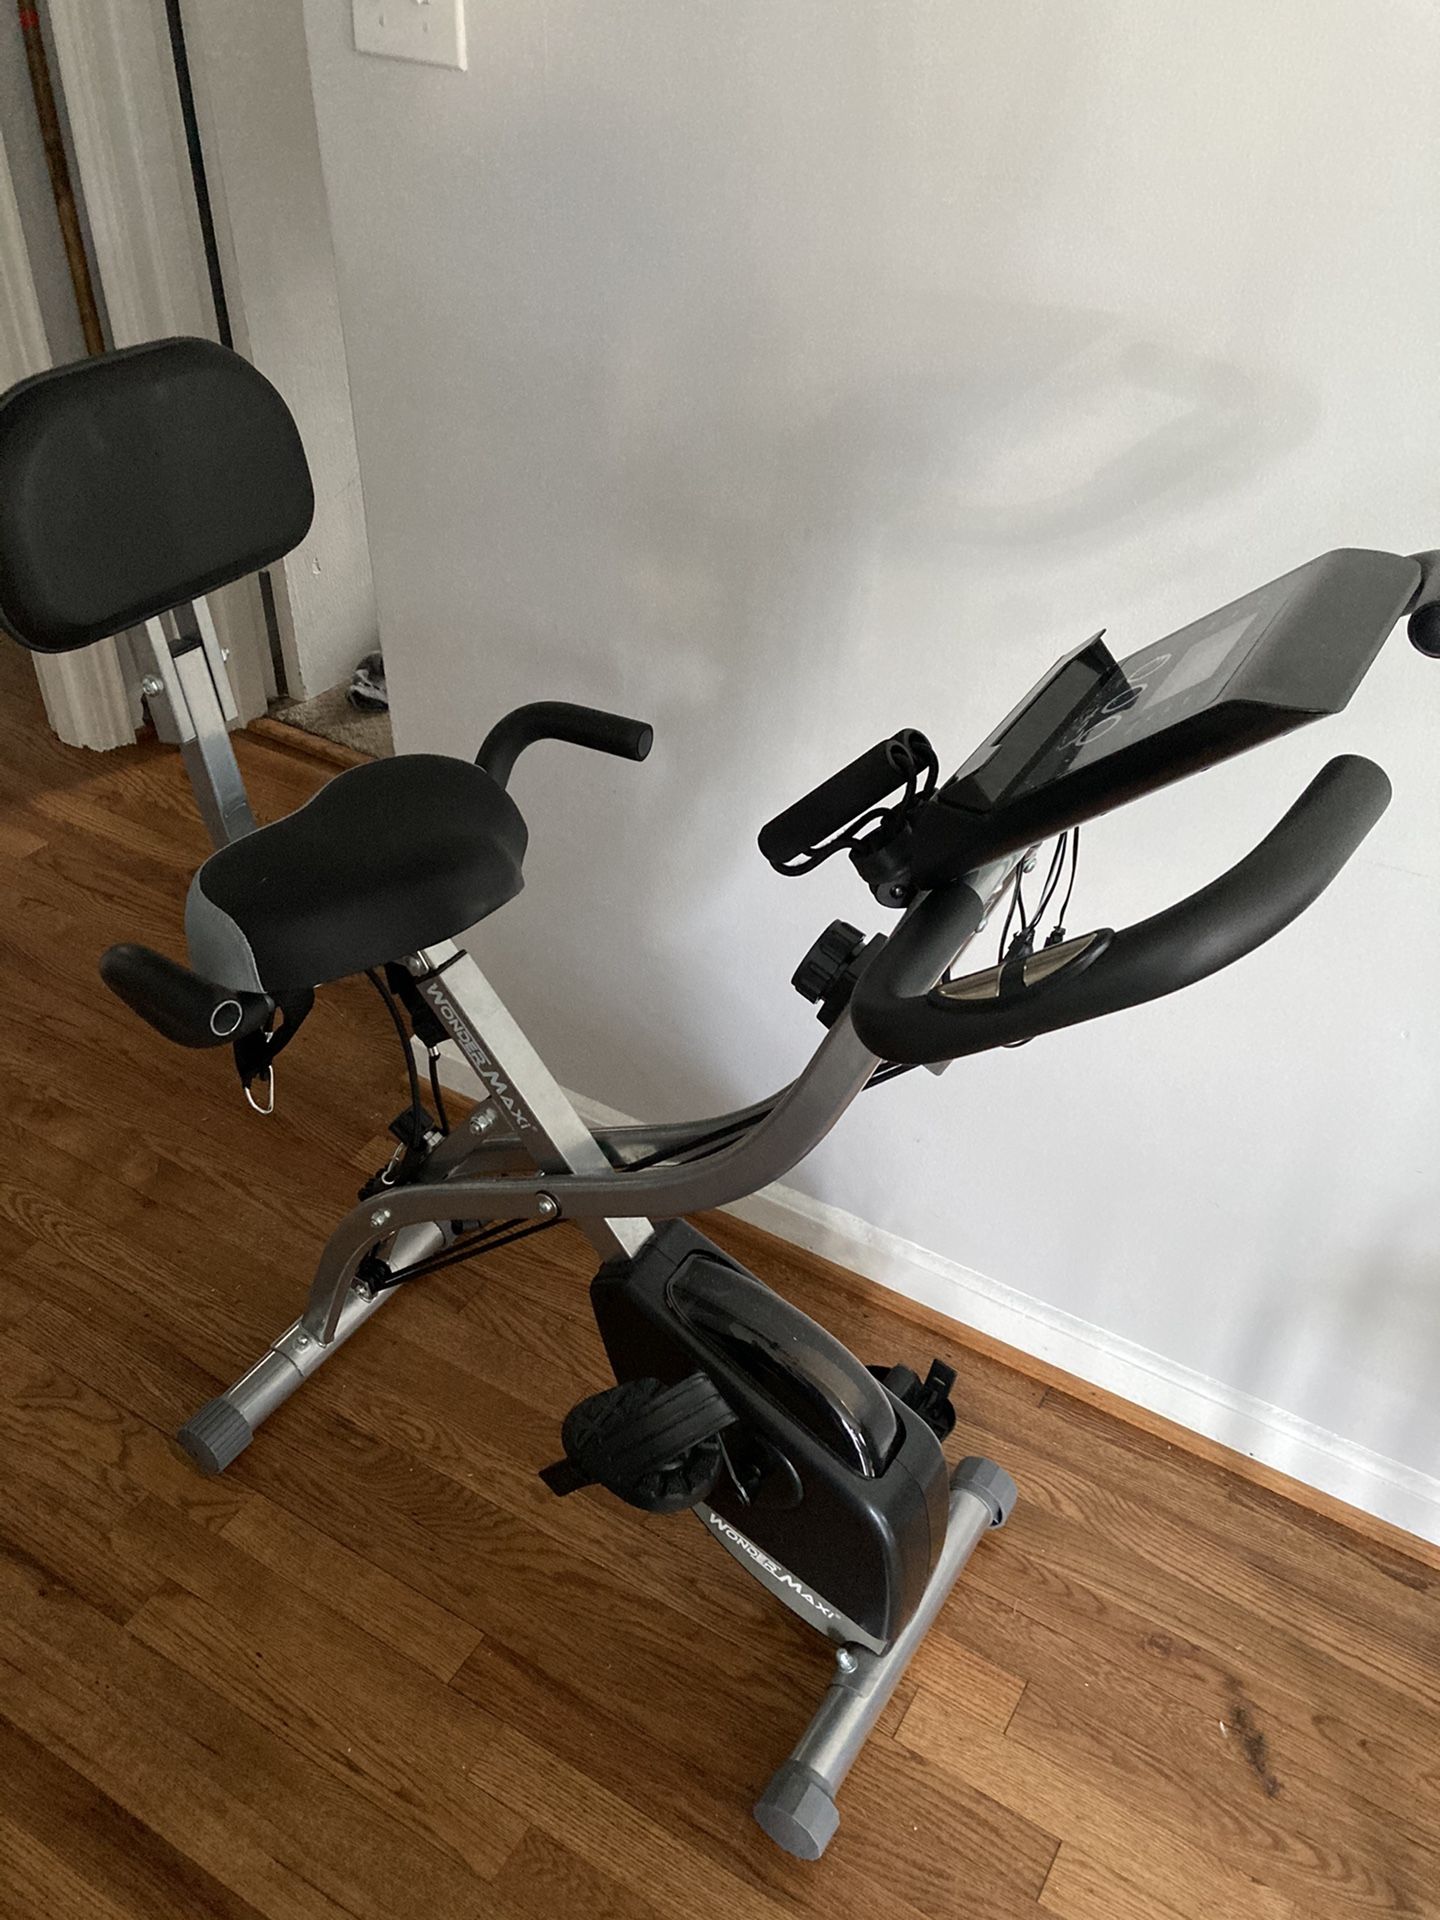 Exercise bike . Purchased 2 months ago. Plastic still in tact. Moving sale $50 pickup by Saturday